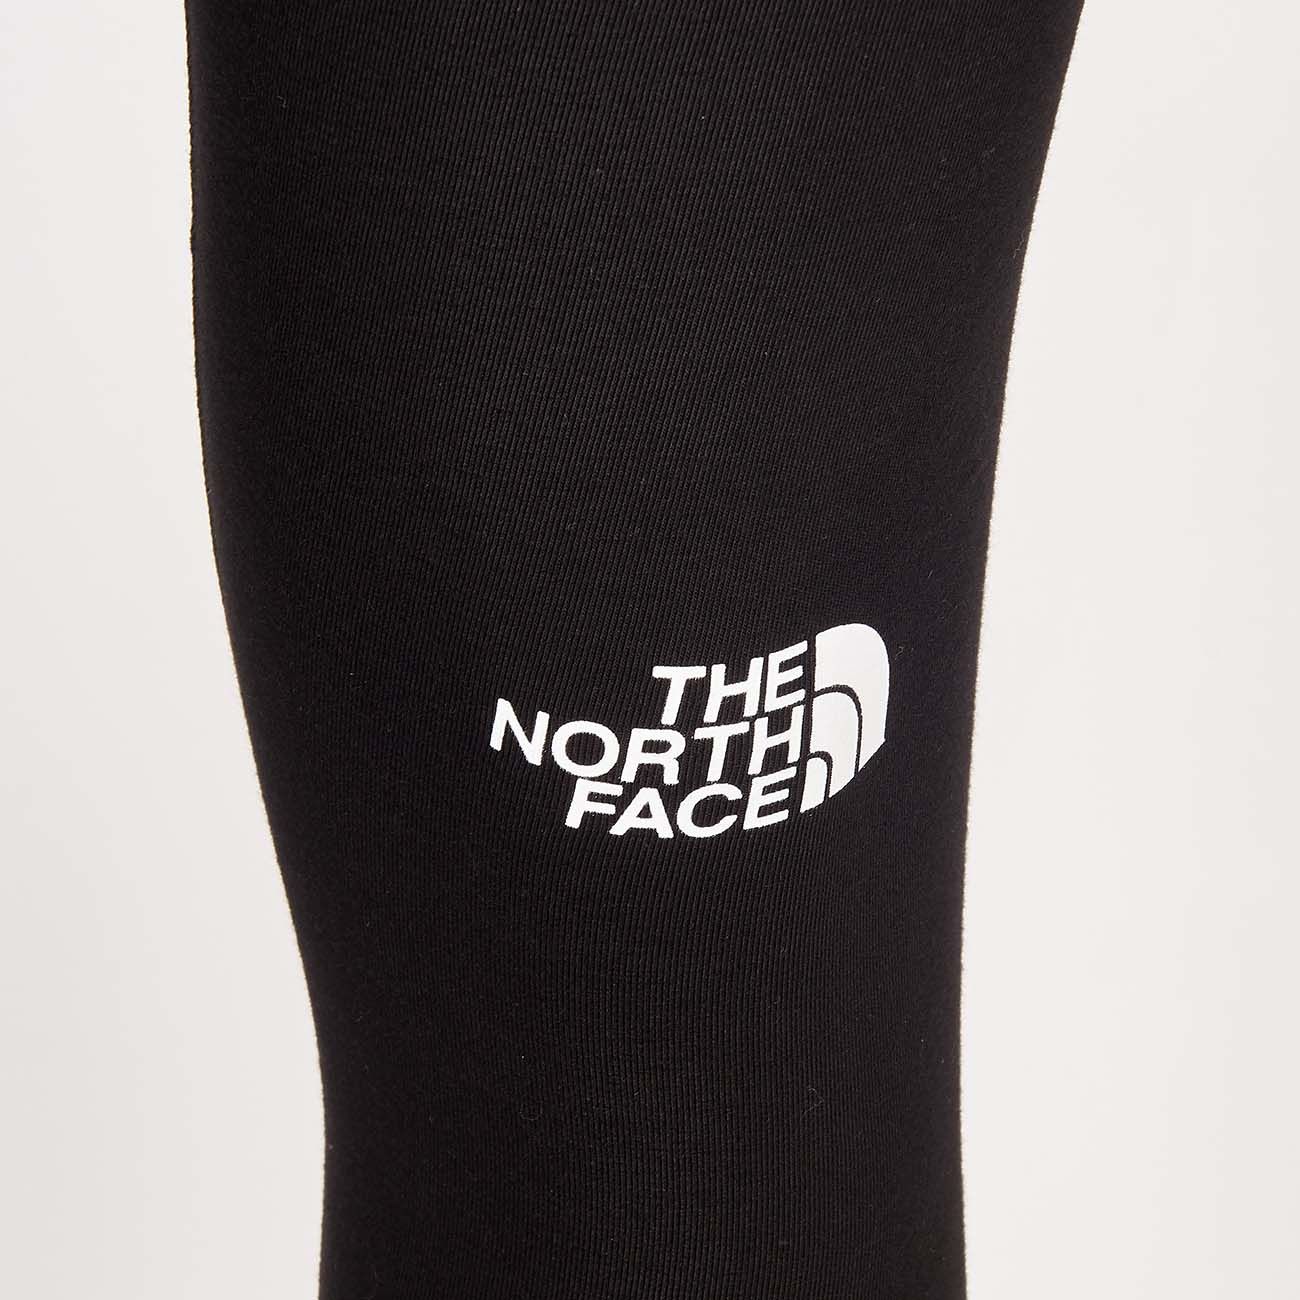 THE NORTH FACE STRETCH LEGGINGS WITH SMALL PRINTED LOGO Woman Black